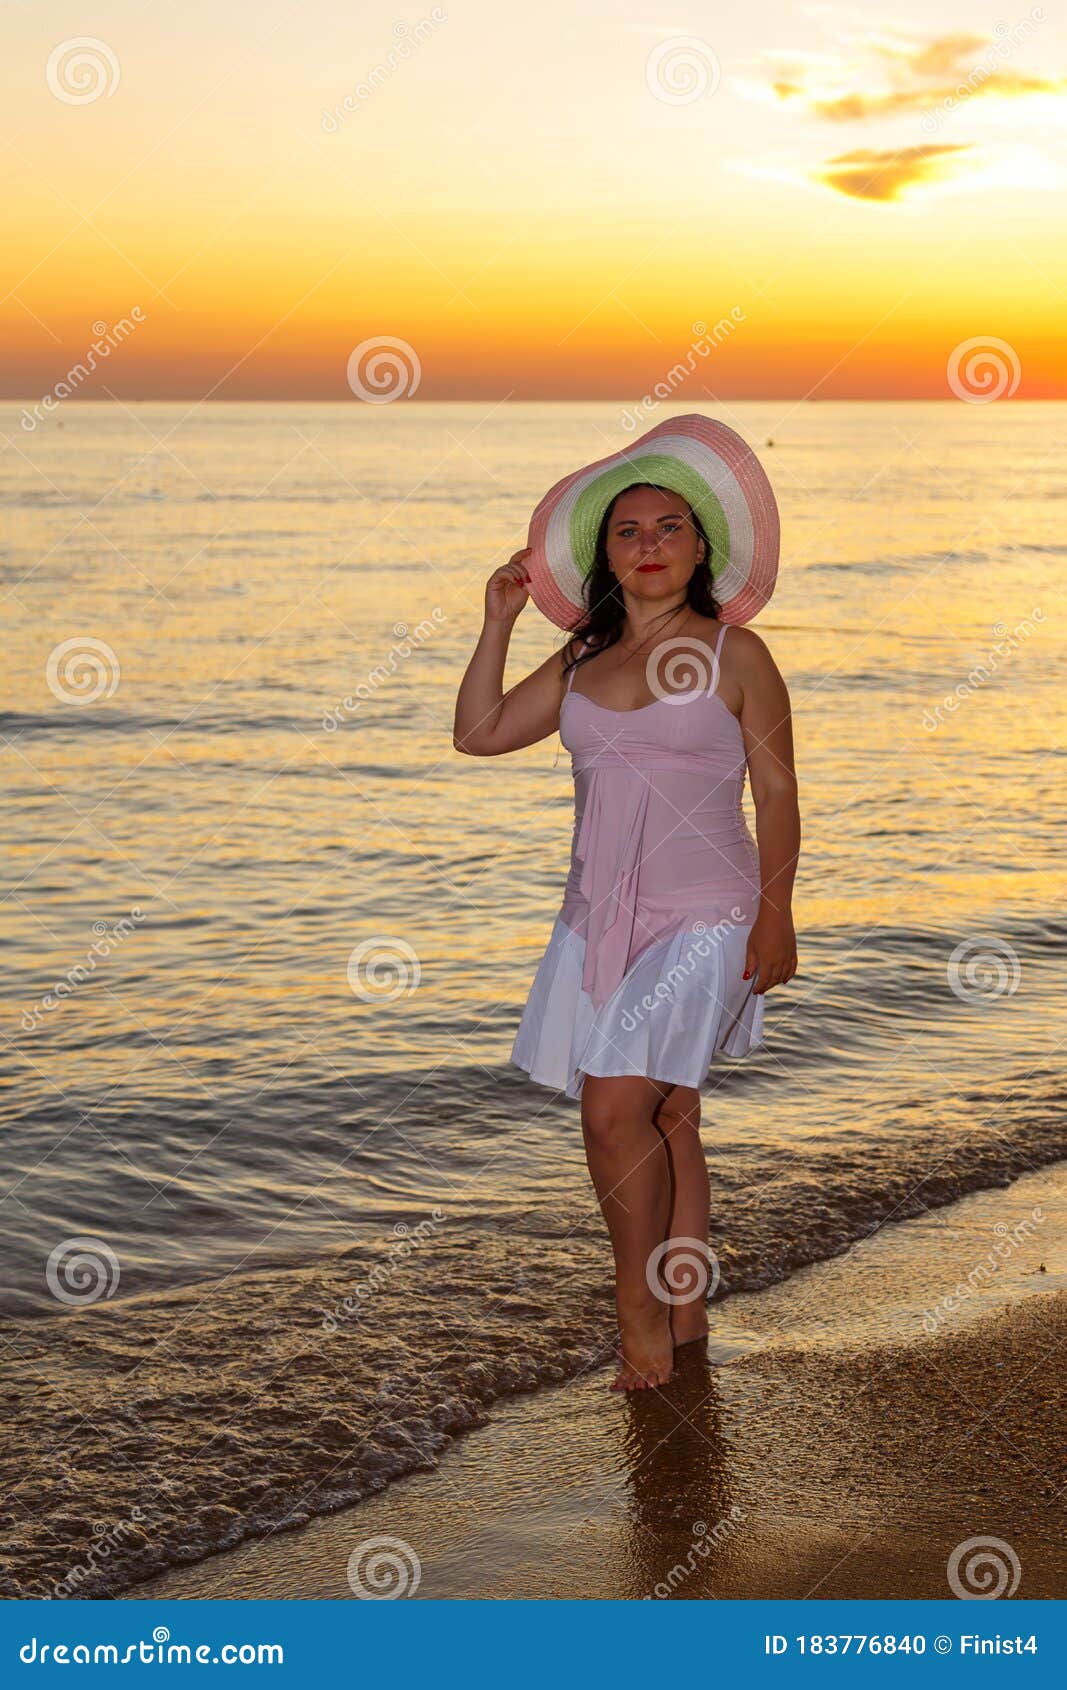 a young woman in a white dress and hat stands on the seashore at sunset